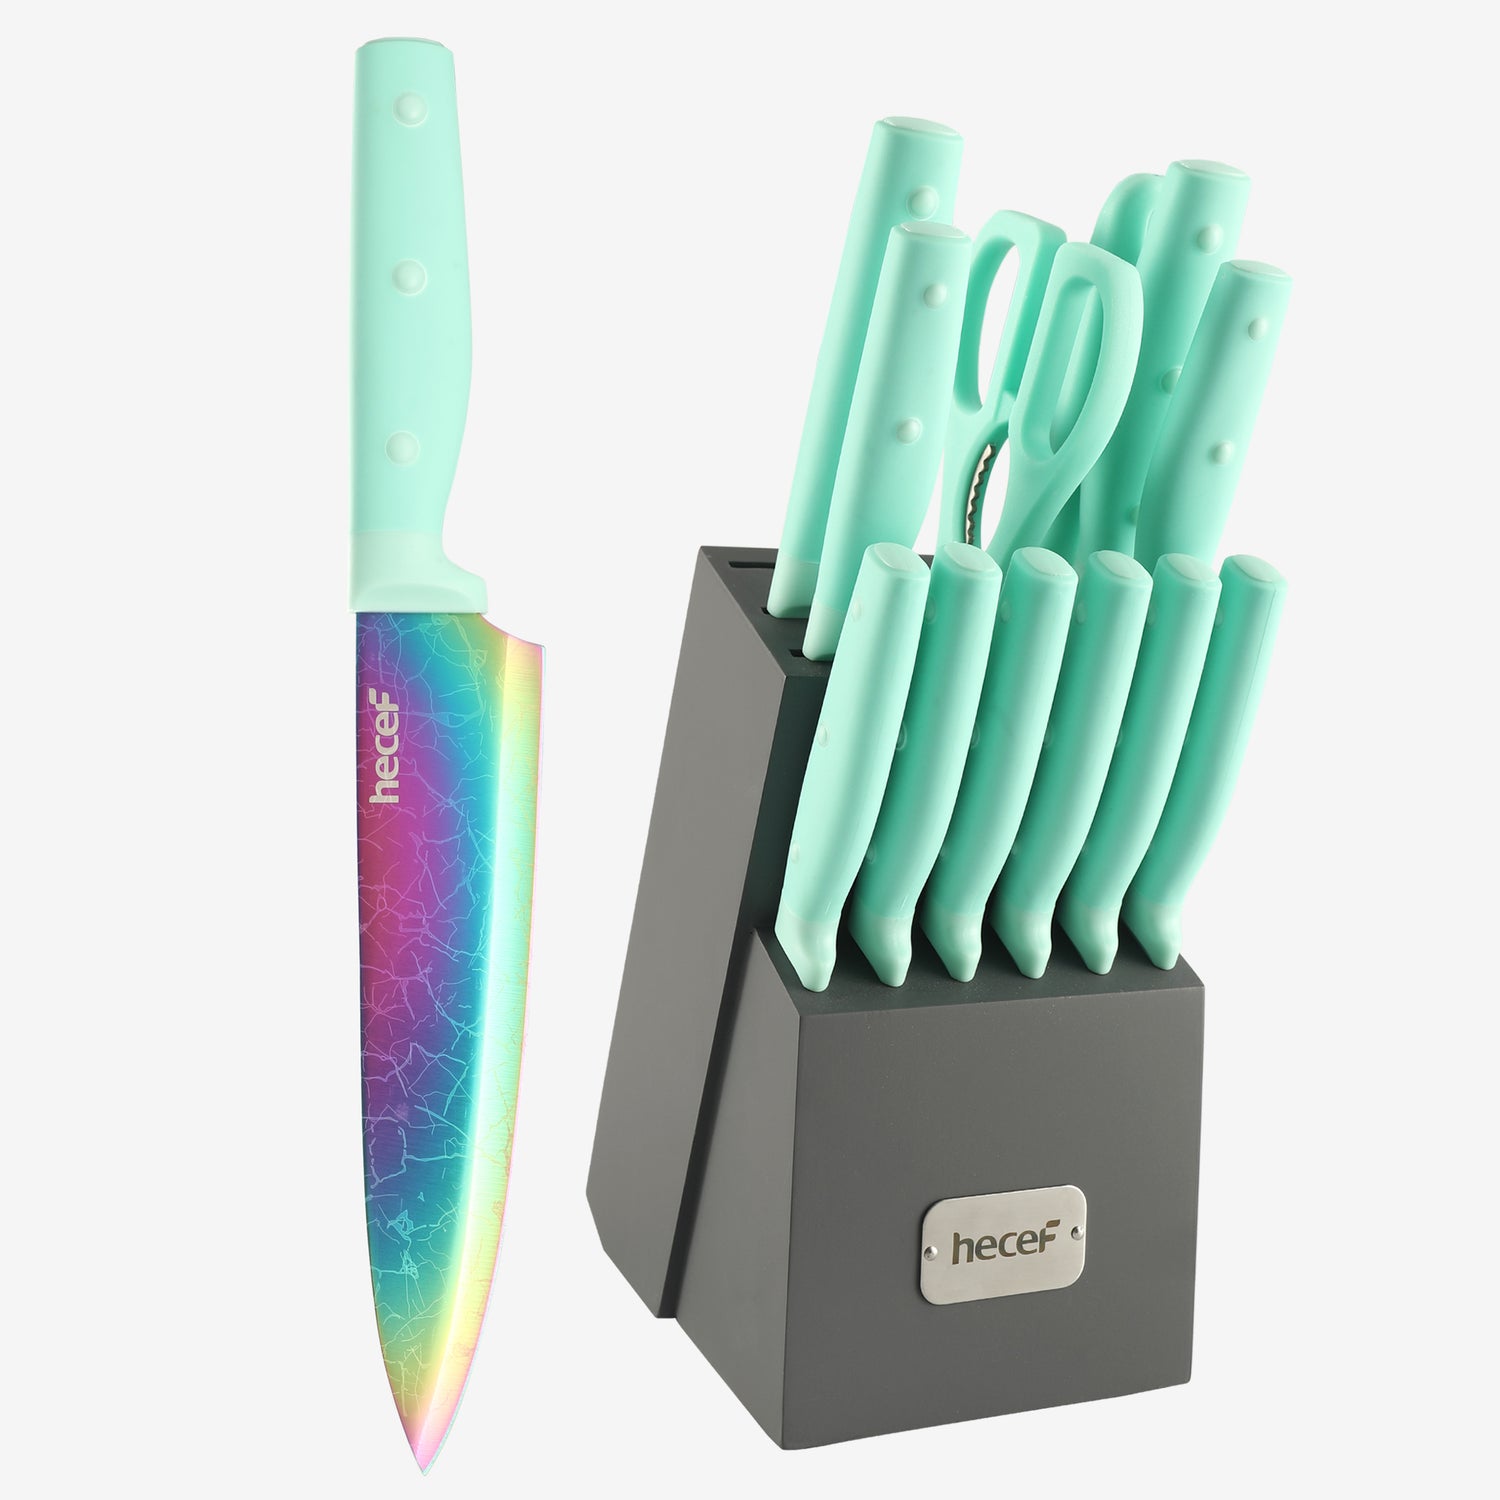 HAUSHOF Kitchen Knife Set, 5 Pieces Rainbow Knife Sets with